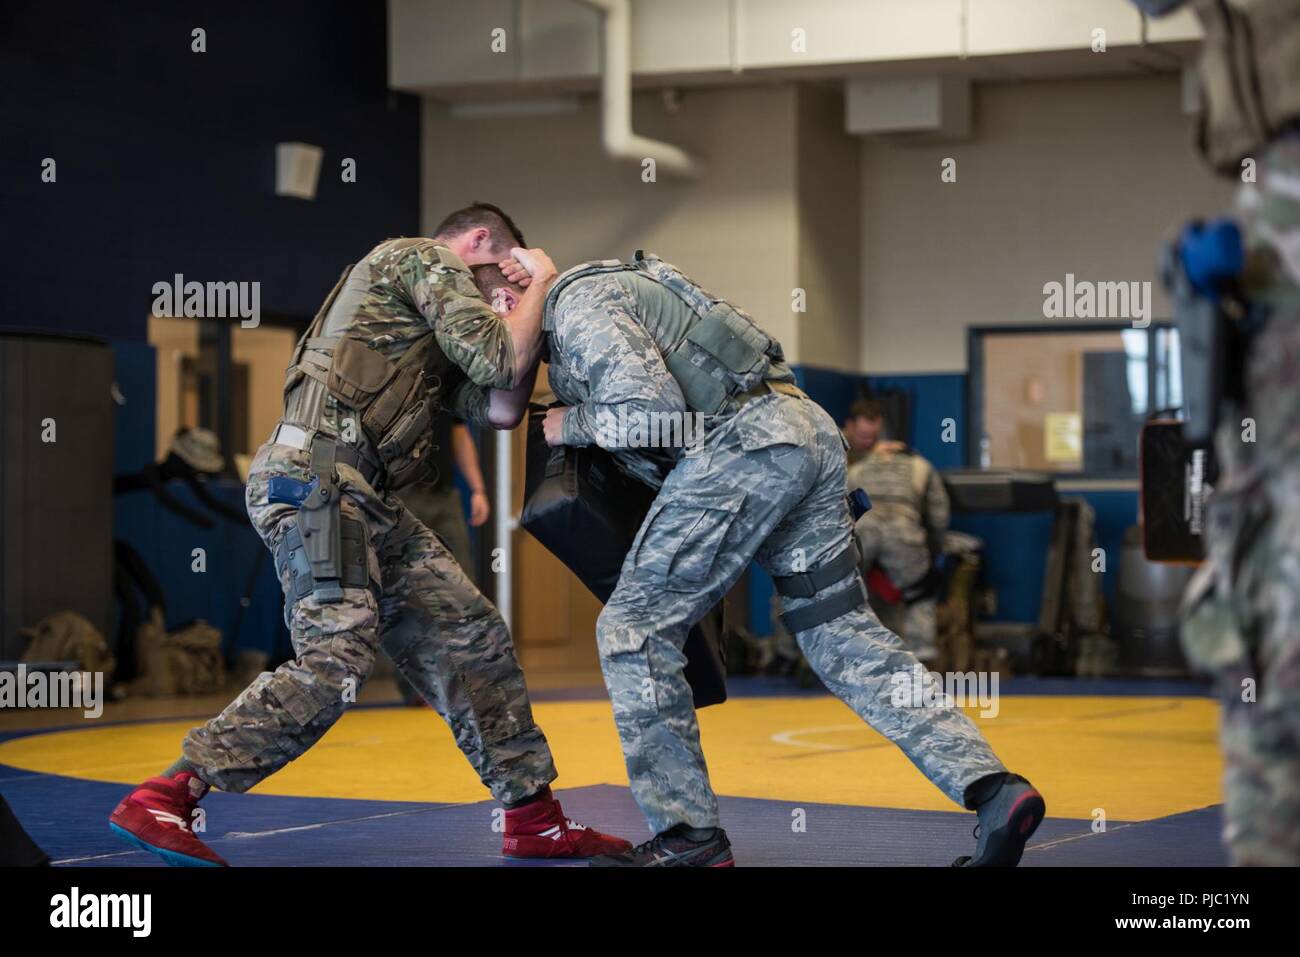 A security forces specialist (left) from the 193rd Special Operations Security Forces Squadron, Pennsylvania Air National Guard, defends himself during a single-assailant drill July 13, 2018 at the Middletown High School in Middletown, Pennsylvania. The 193rd SOSFS Airmen utilized the four defensive concepts (mobility, winning the angle, distance management, and transition) they learned from the previous two days to defend themselves in a hostile situation. Stock Photo